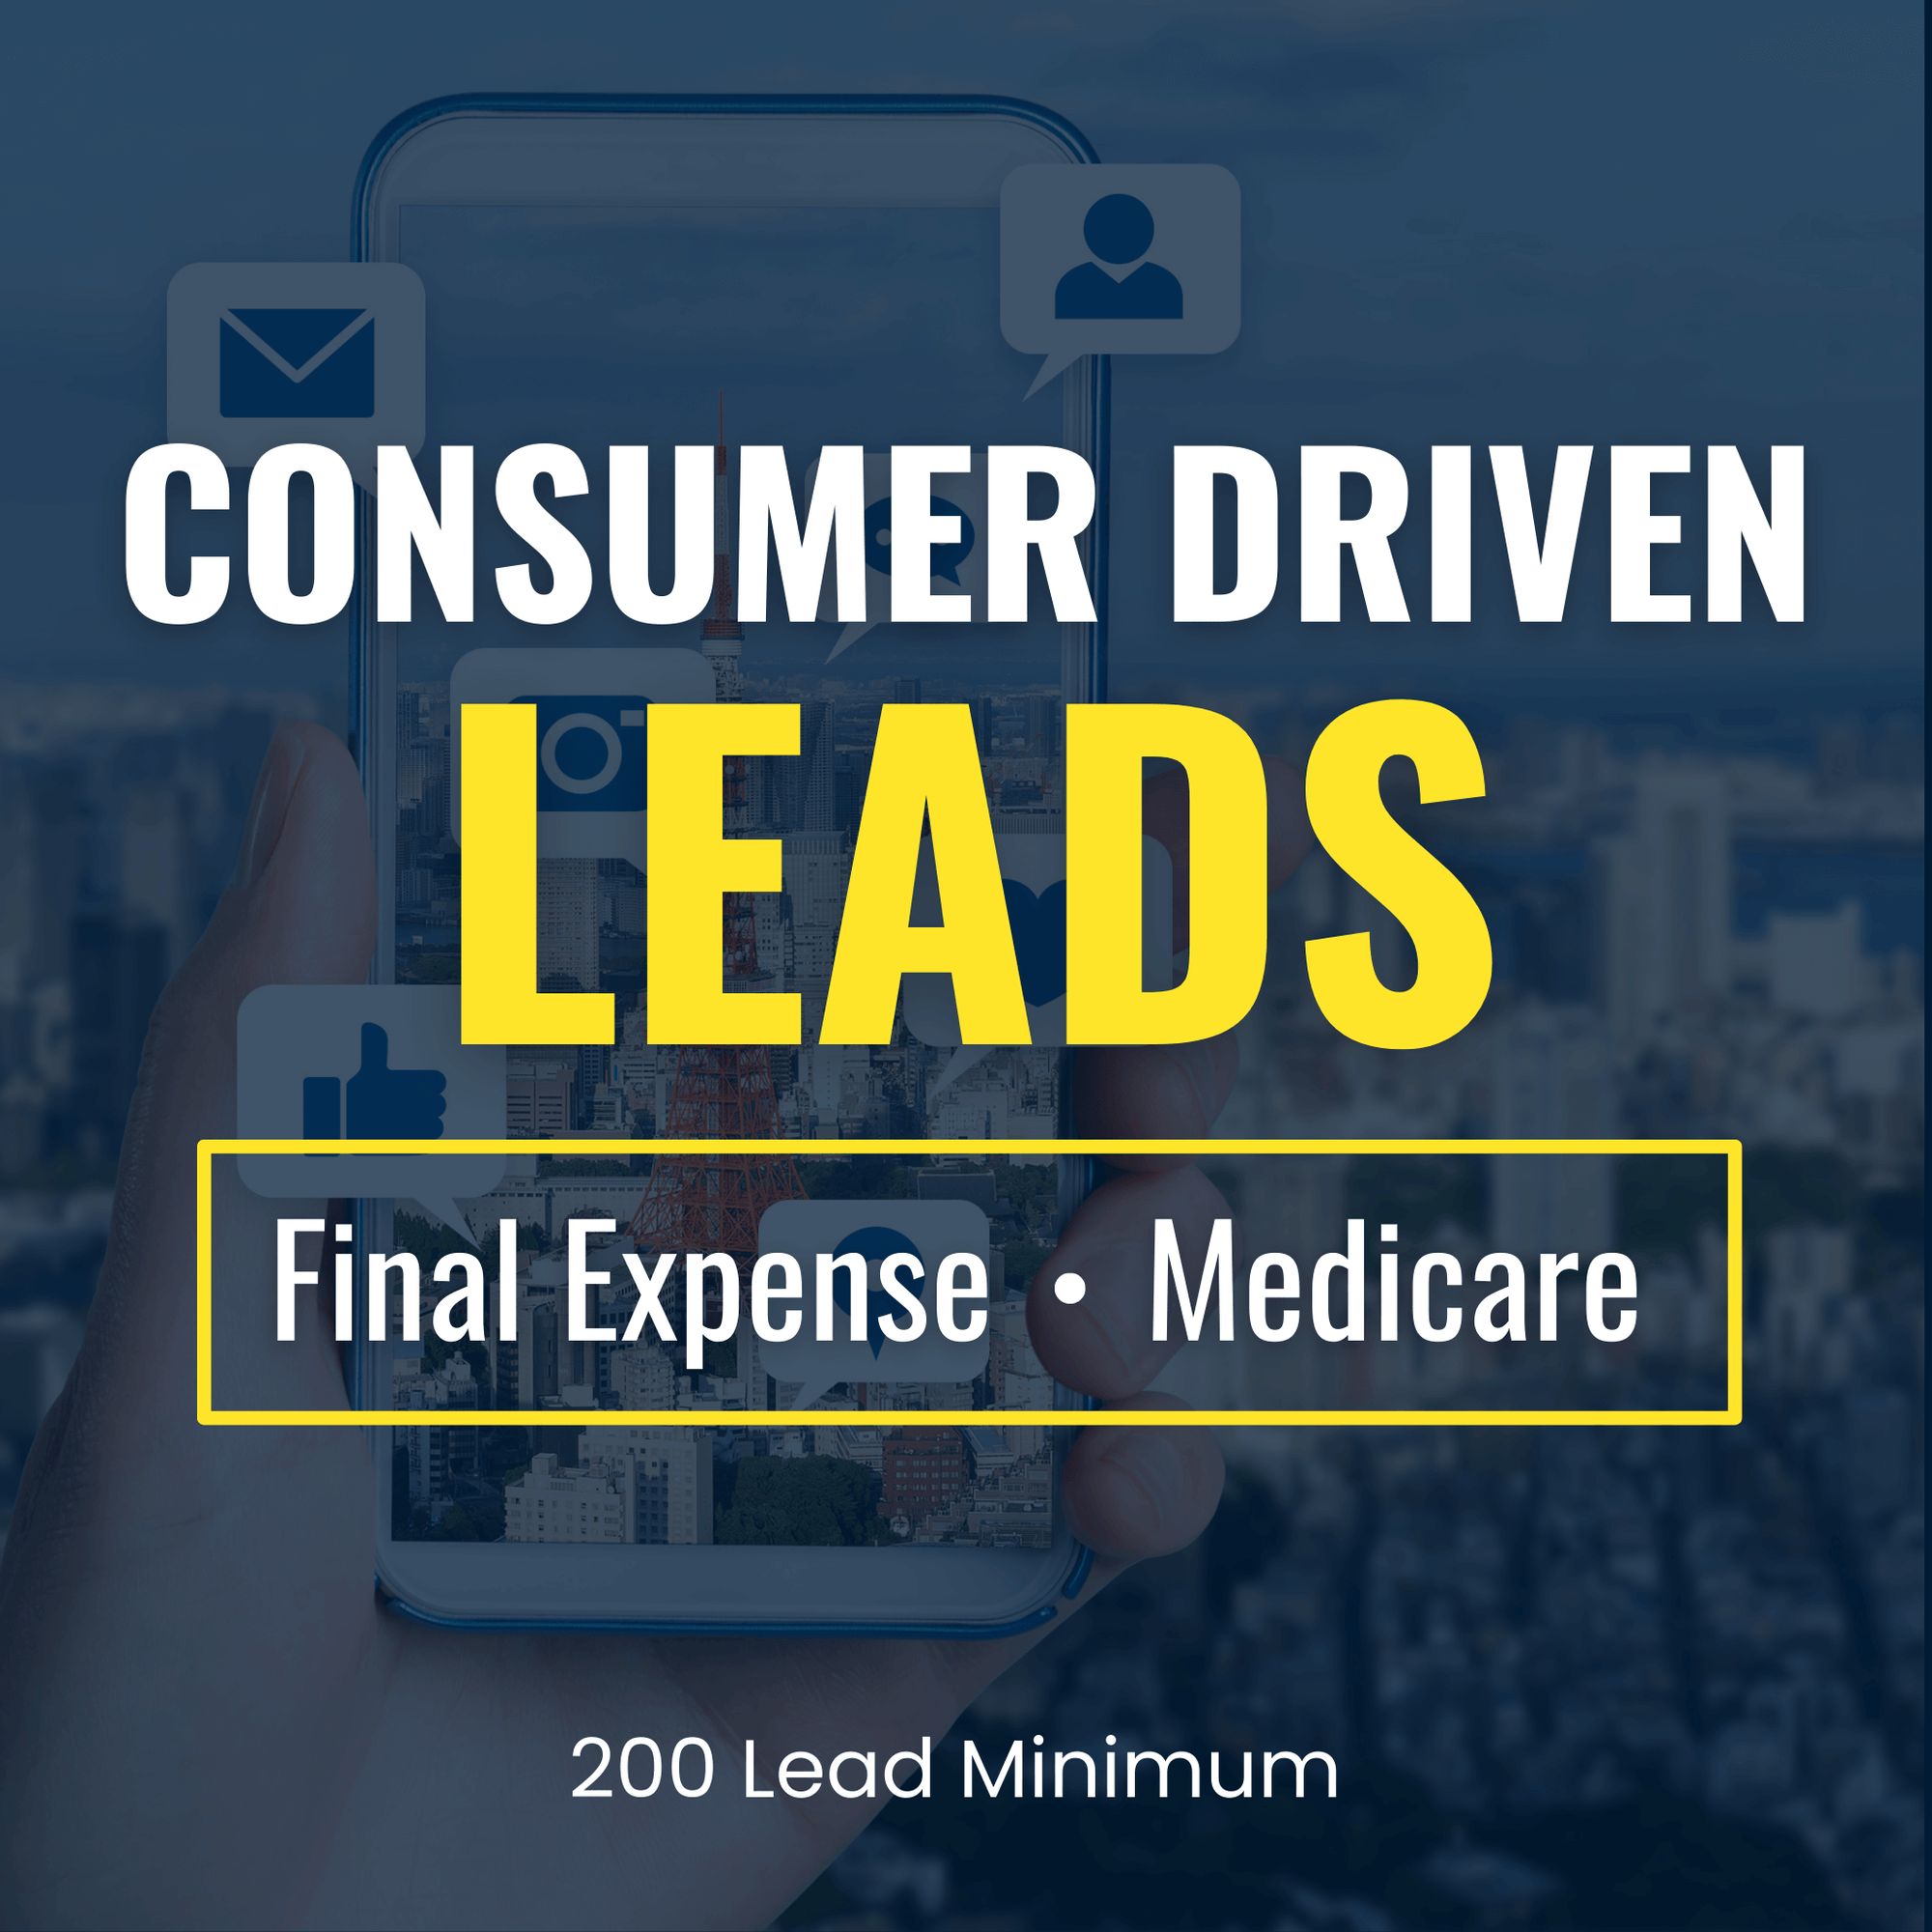 Consumer Driven Leads - Final Expense & Medicare